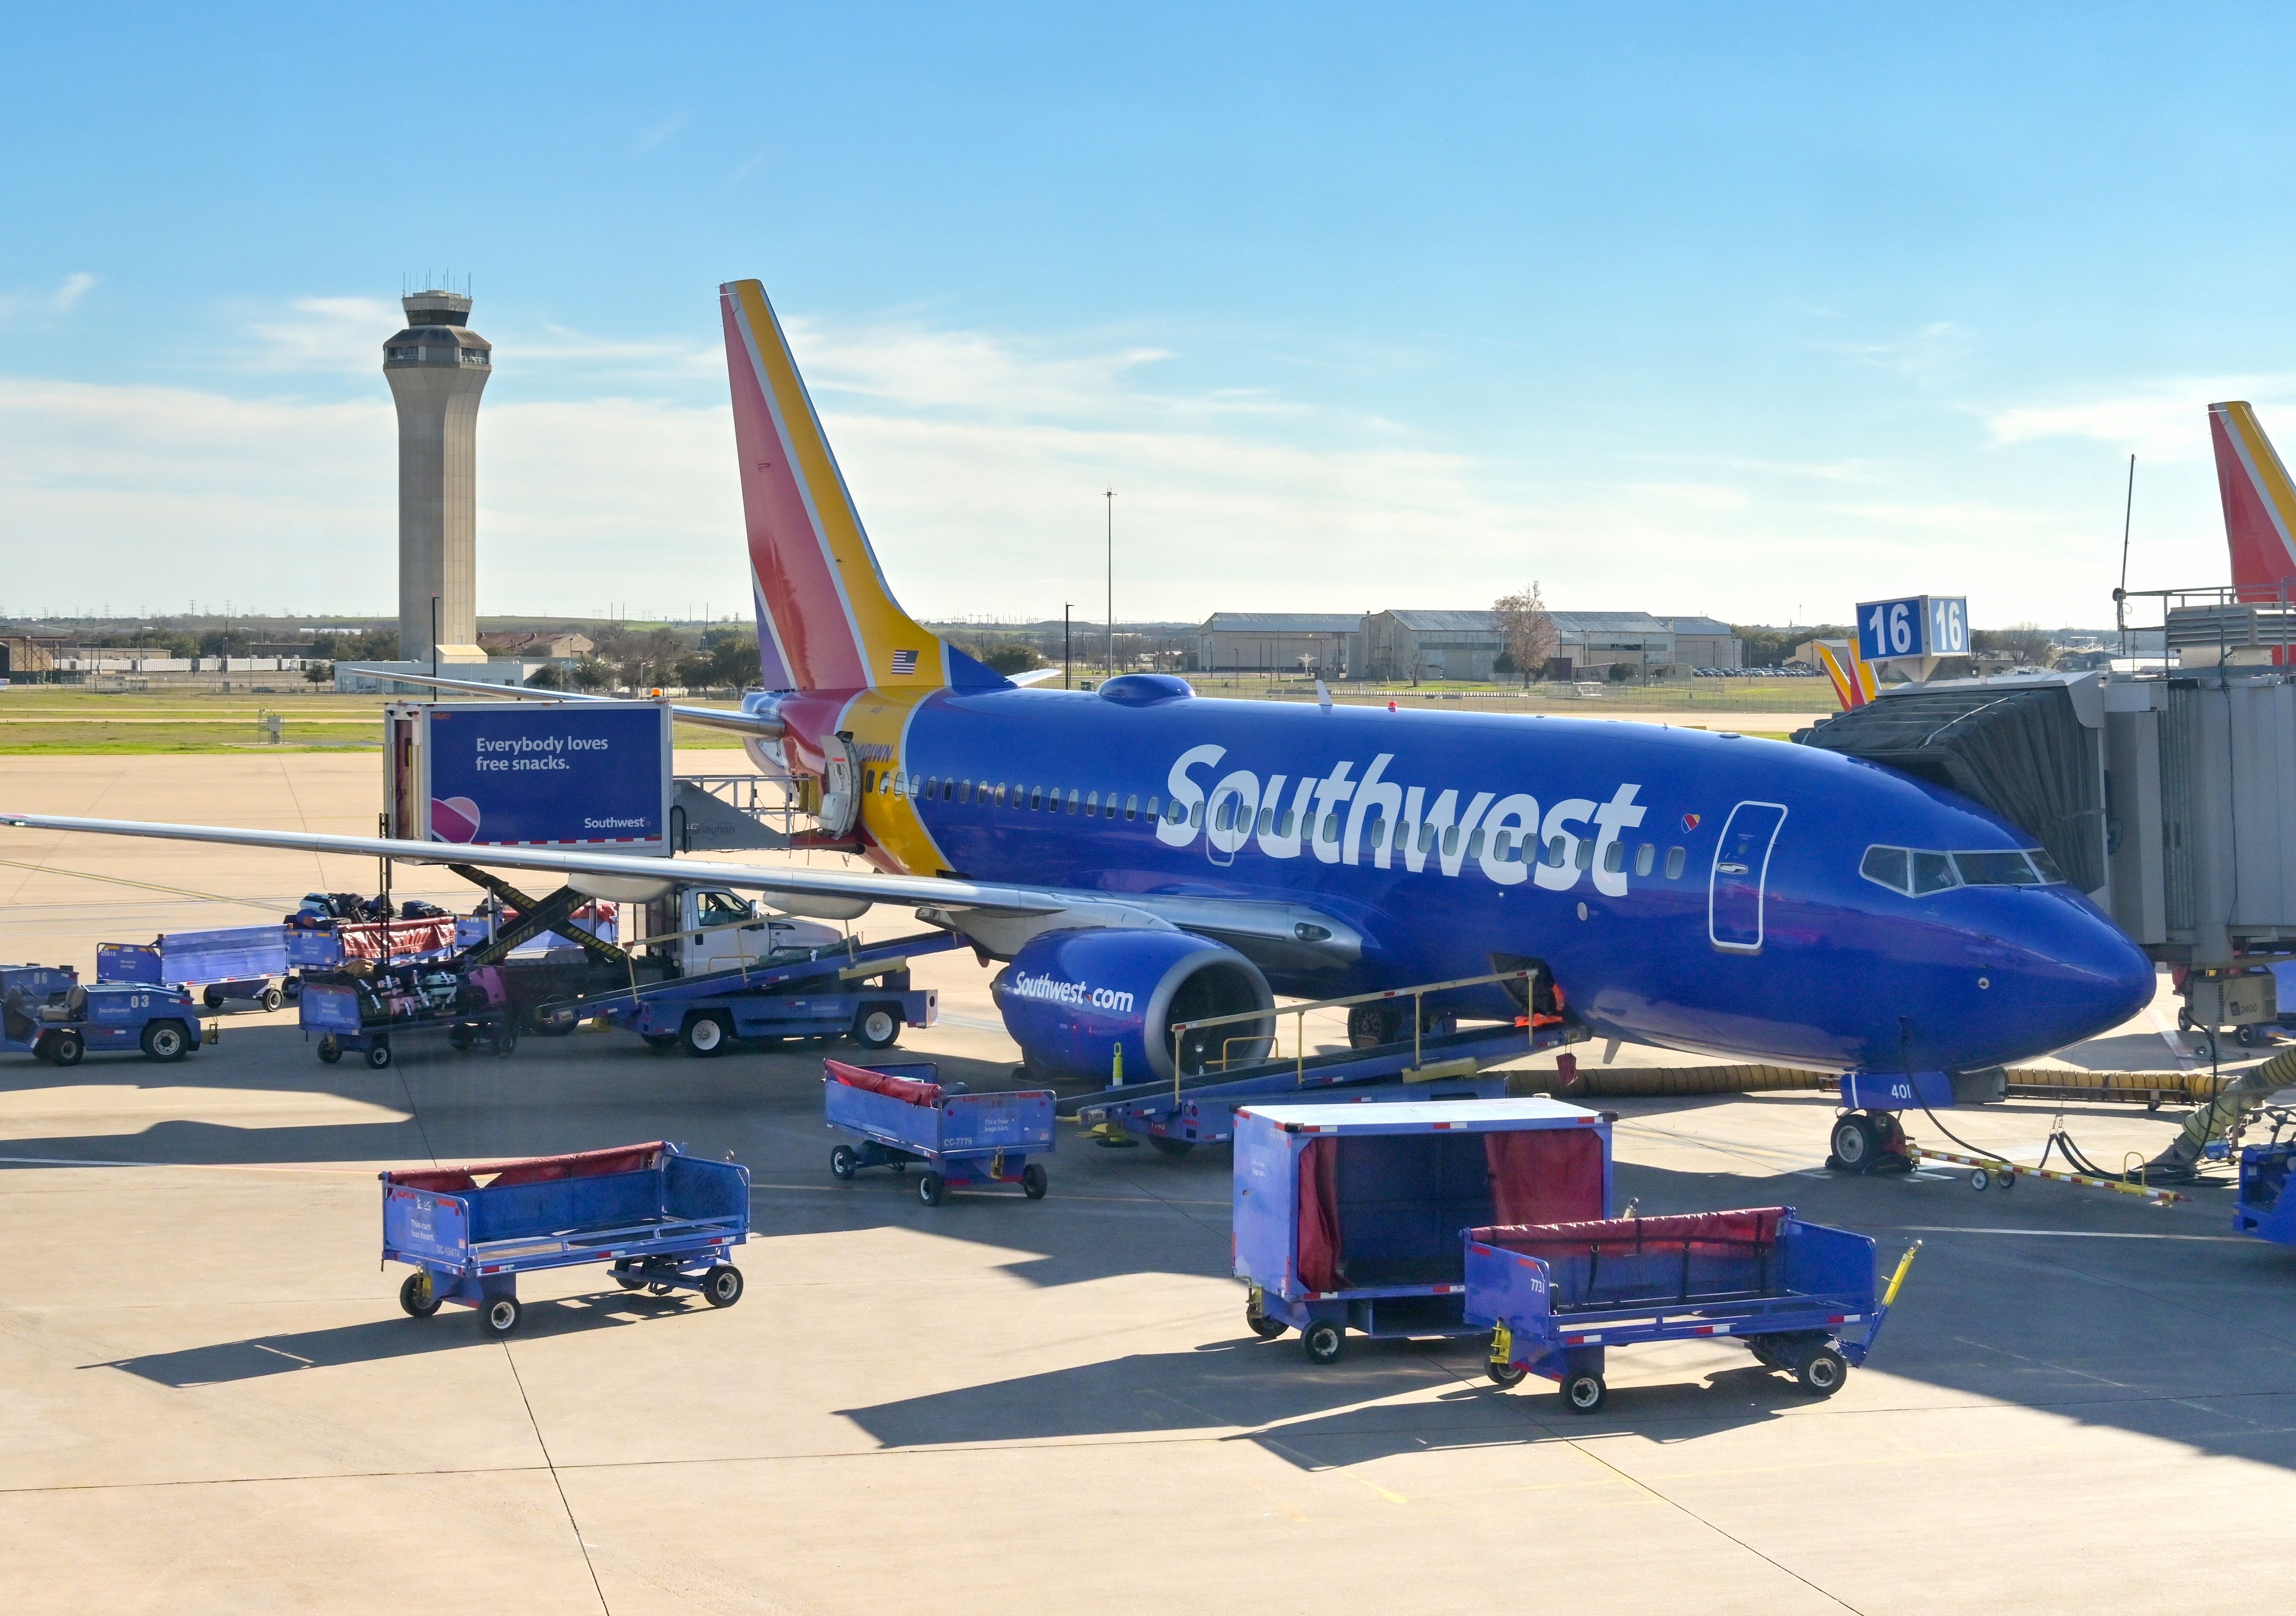 Southwest Airlines 737-700 at the gate at Austin-Bergstrom International Airport.